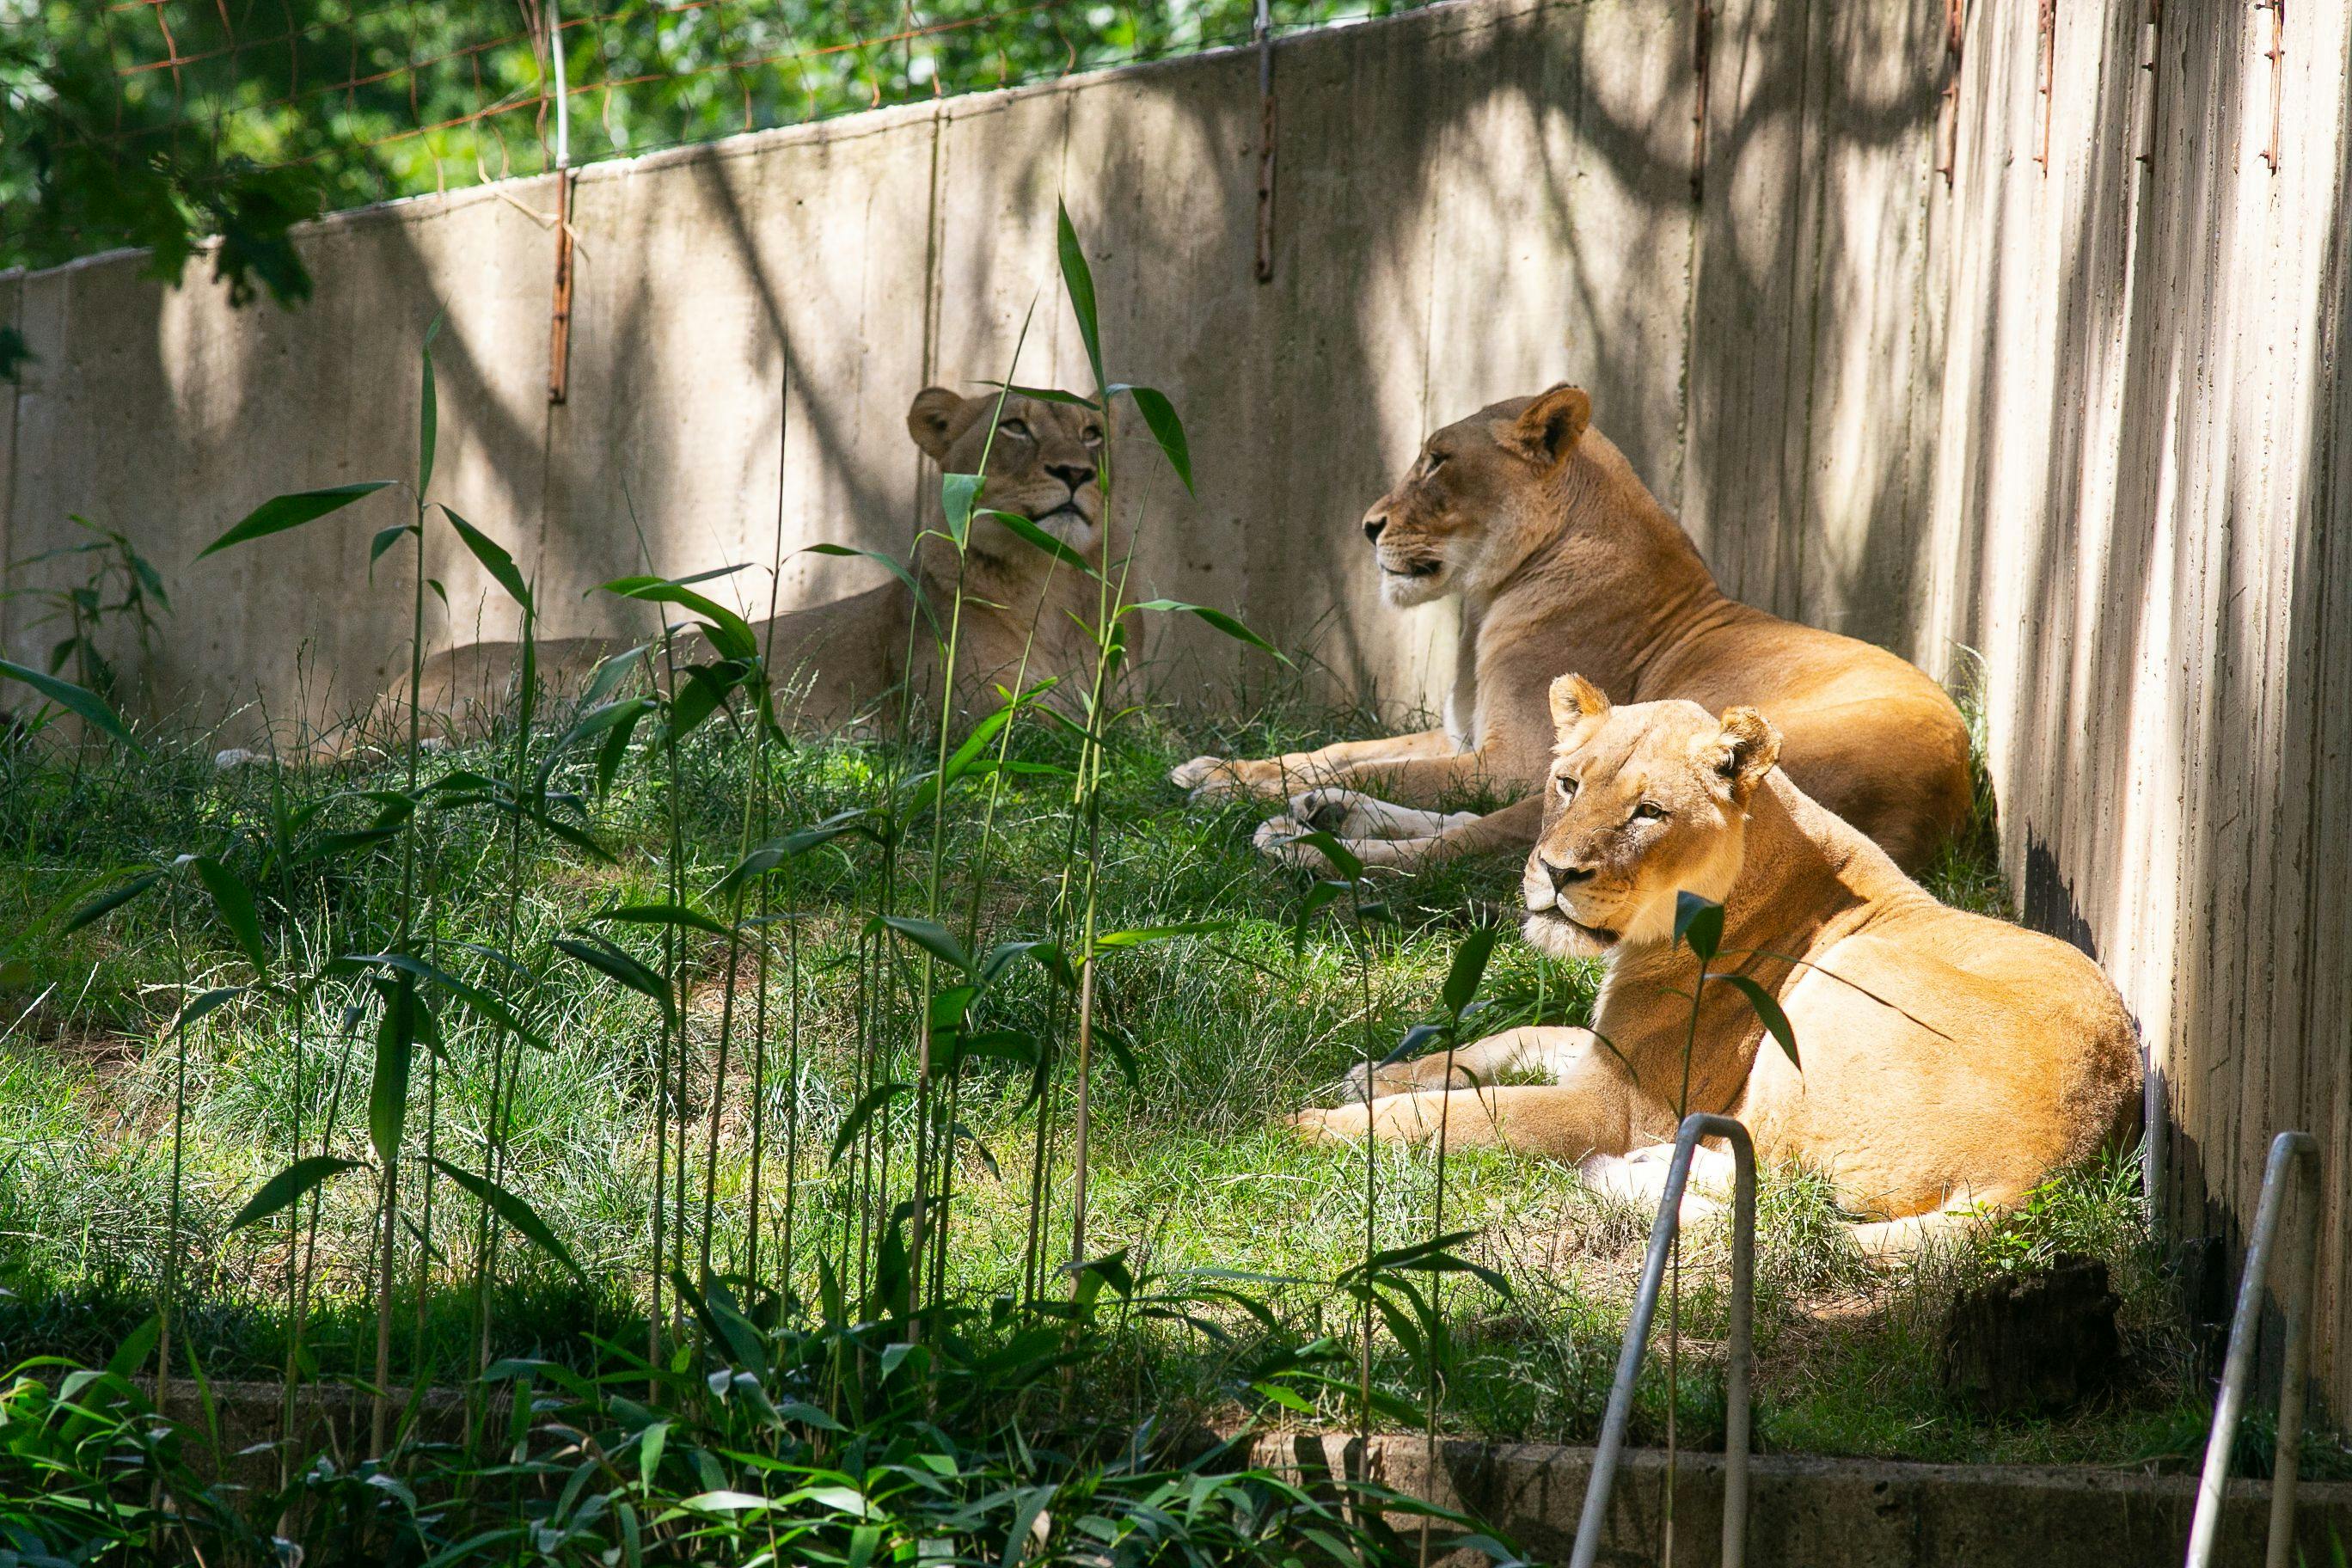 The zoo's lions and tigers appear to be recovering several weeks after testing presumptive positive for COVID-19 (Photo courtesy of Smithsonian's National Zoo & Conservation Biology Institute).